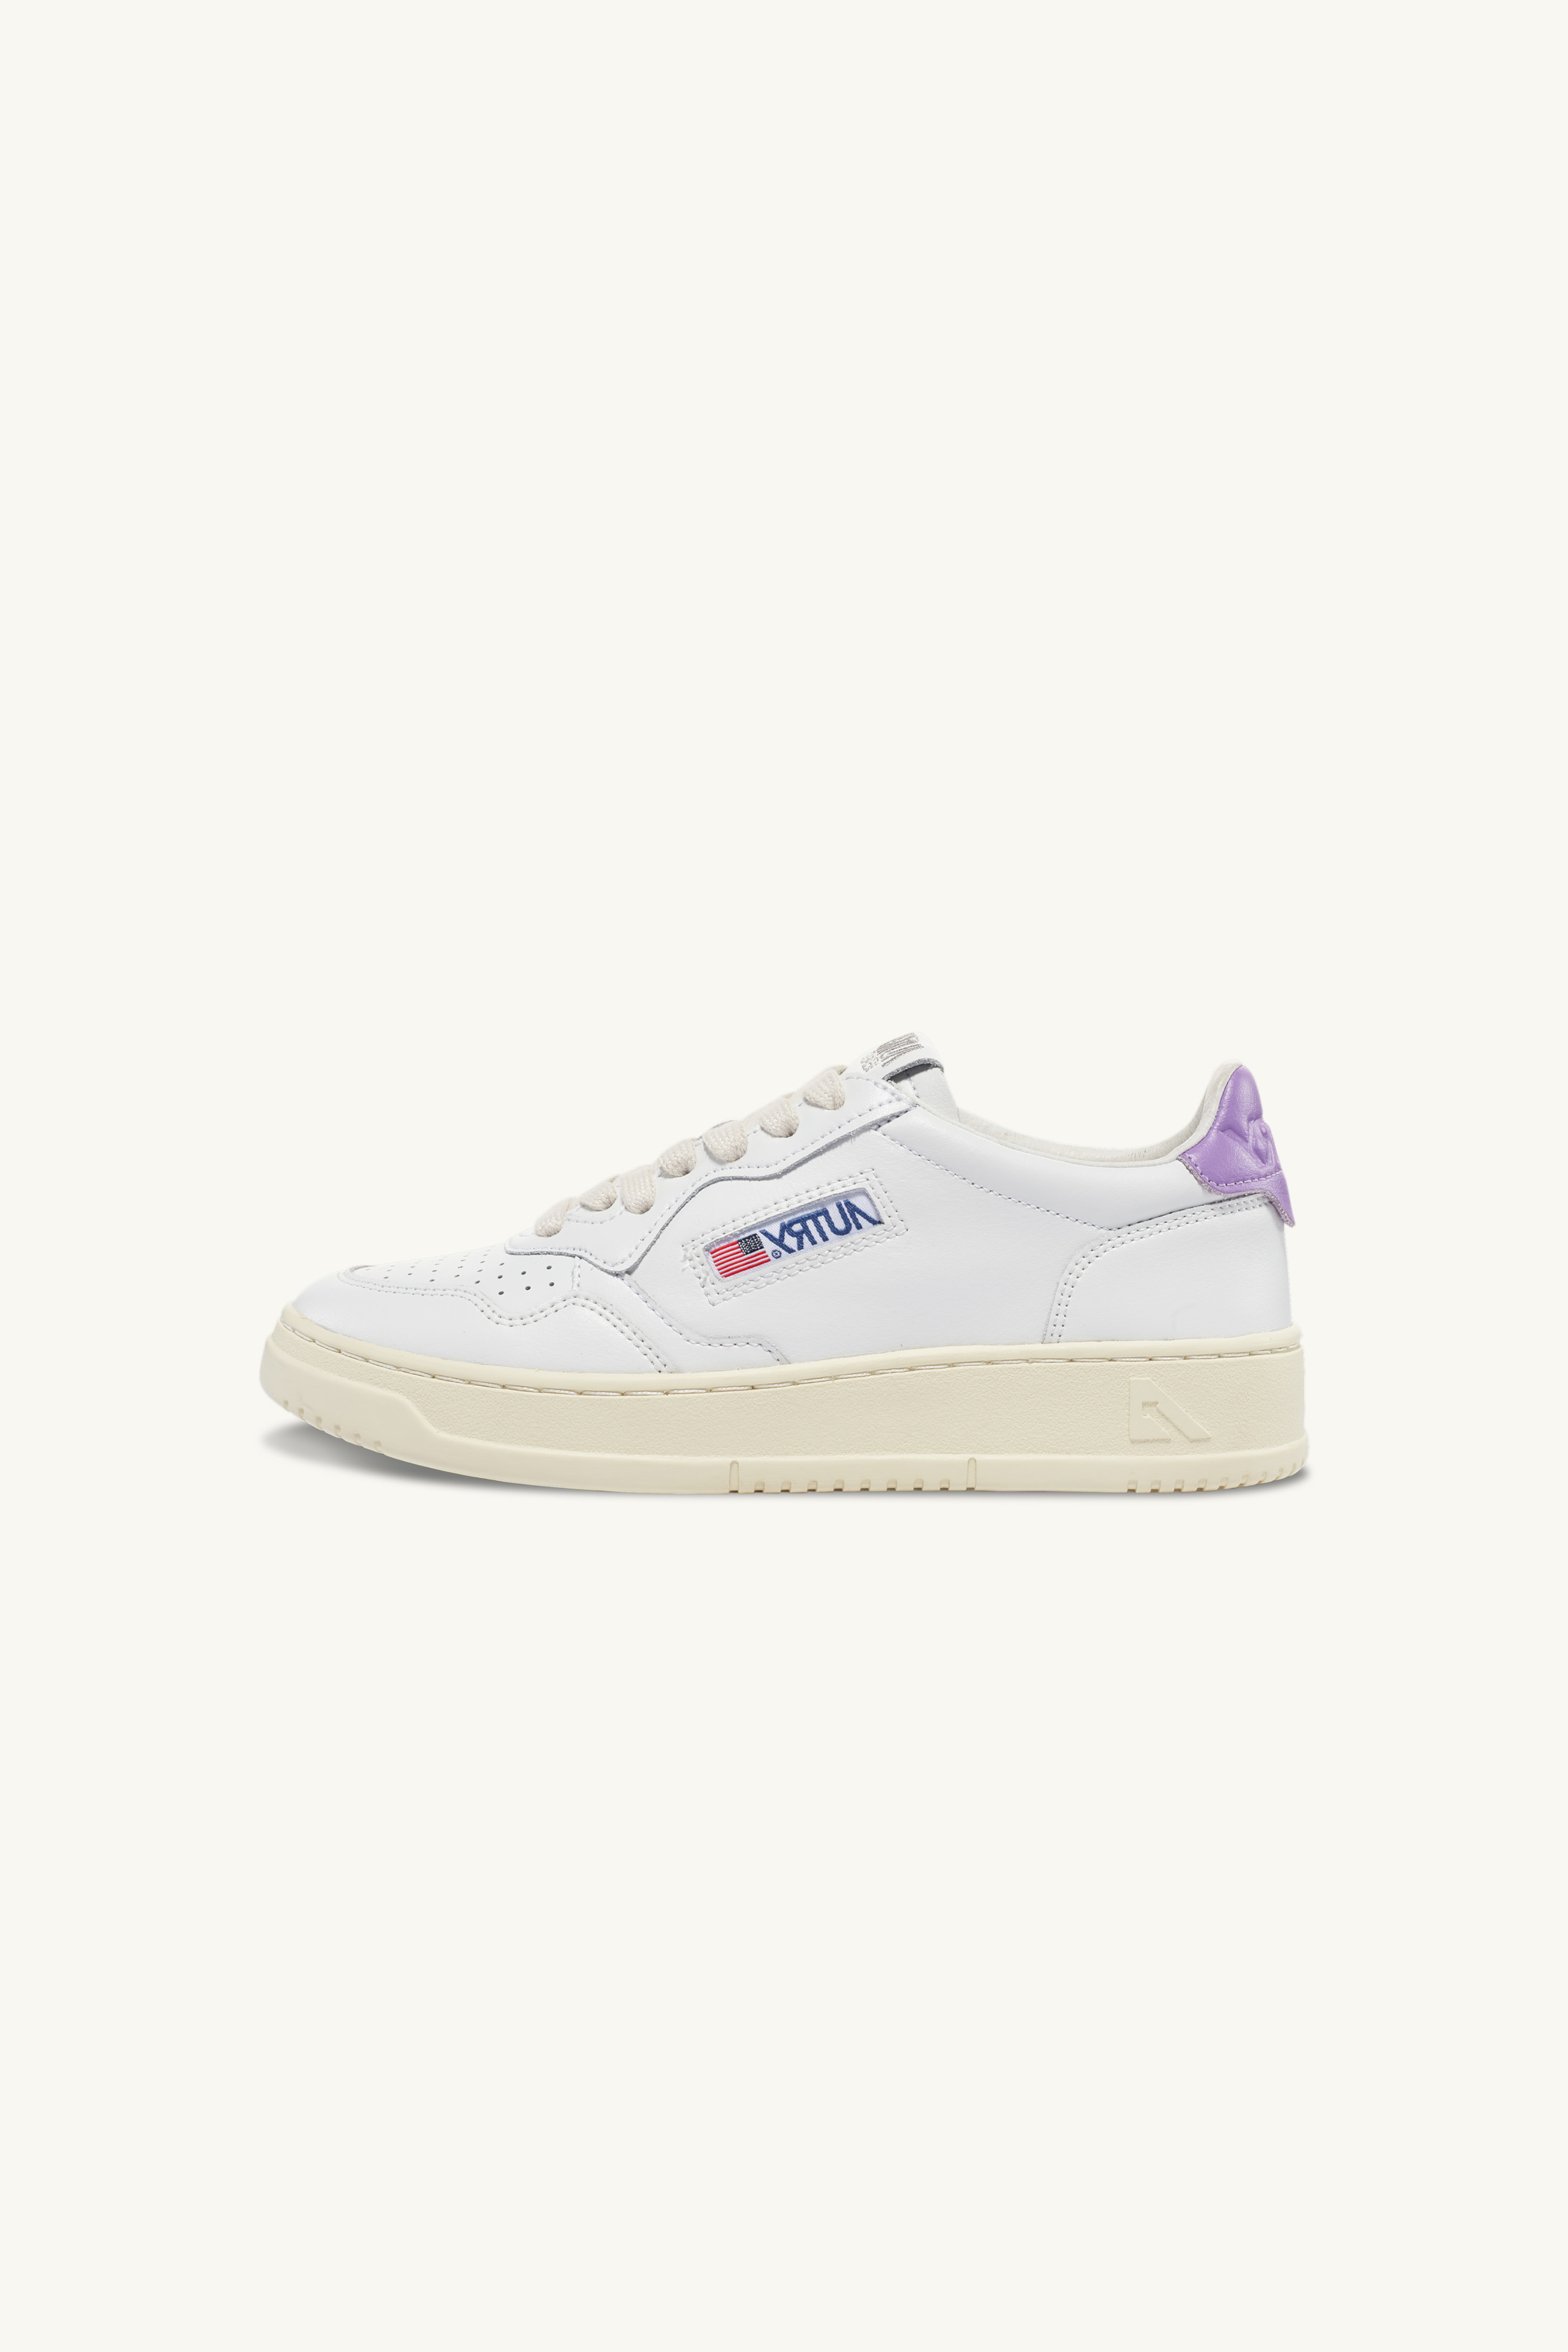 AULW-LL59 - MEDALIST LOW SNEAKER - WHITE/LILAC